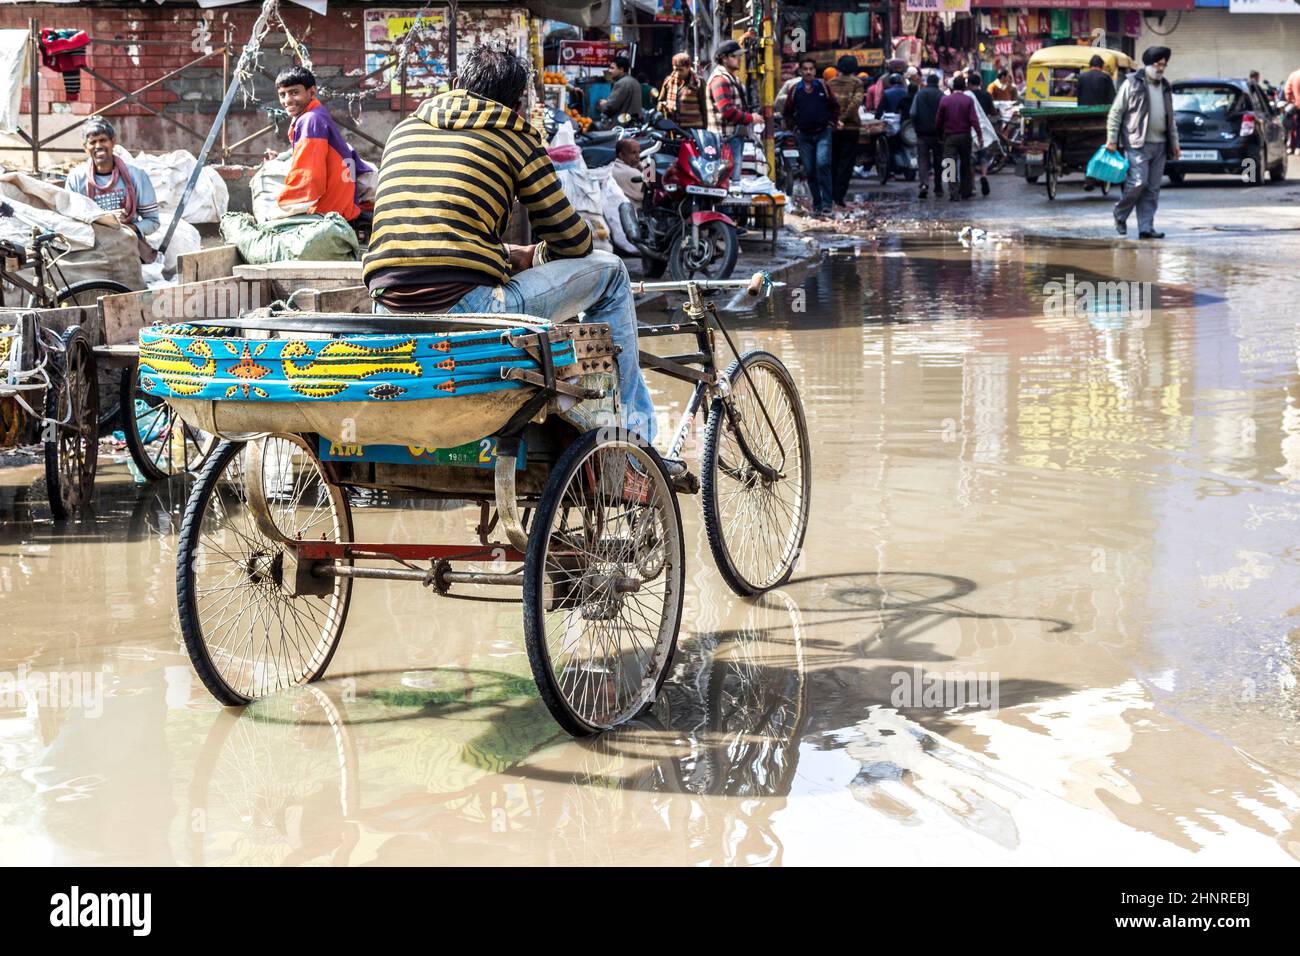 young rickshaw driver waits for guests at the flooded street in rainy season Stock Photo